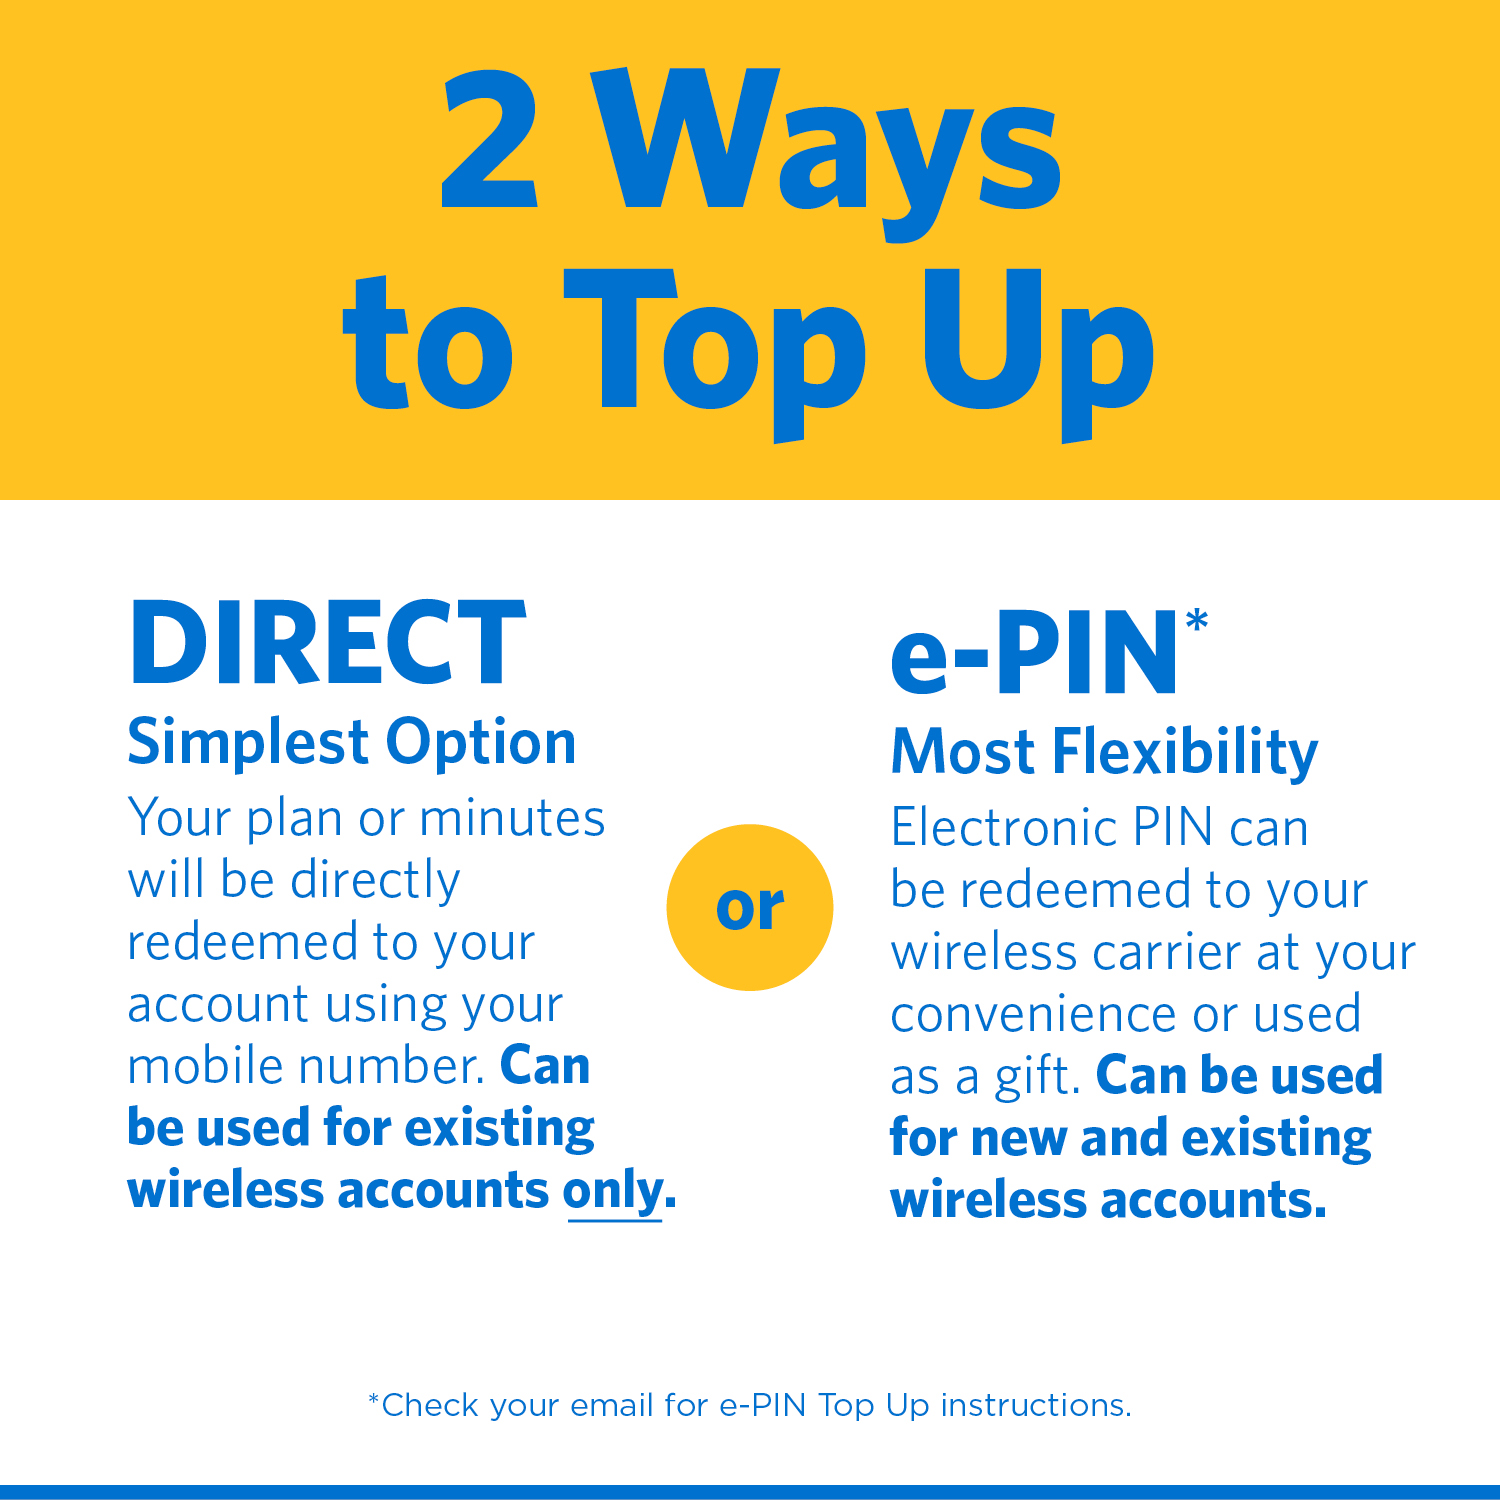 T-Mobile Prepaid $25 Direct Top Up - image 2 of 4